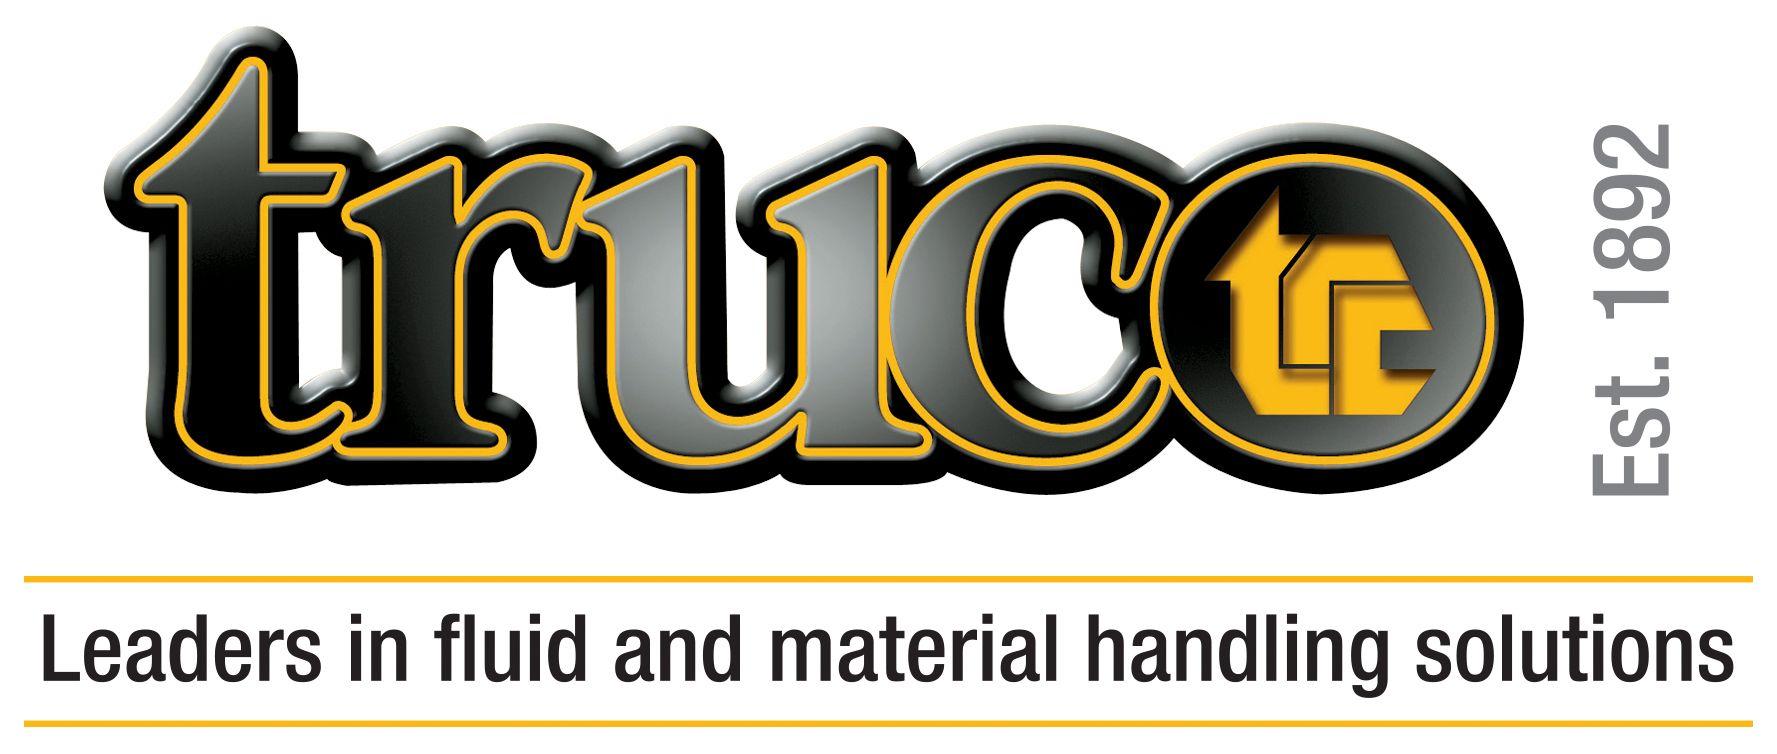 Truco Logo - Industrial Rubber Products by Truco